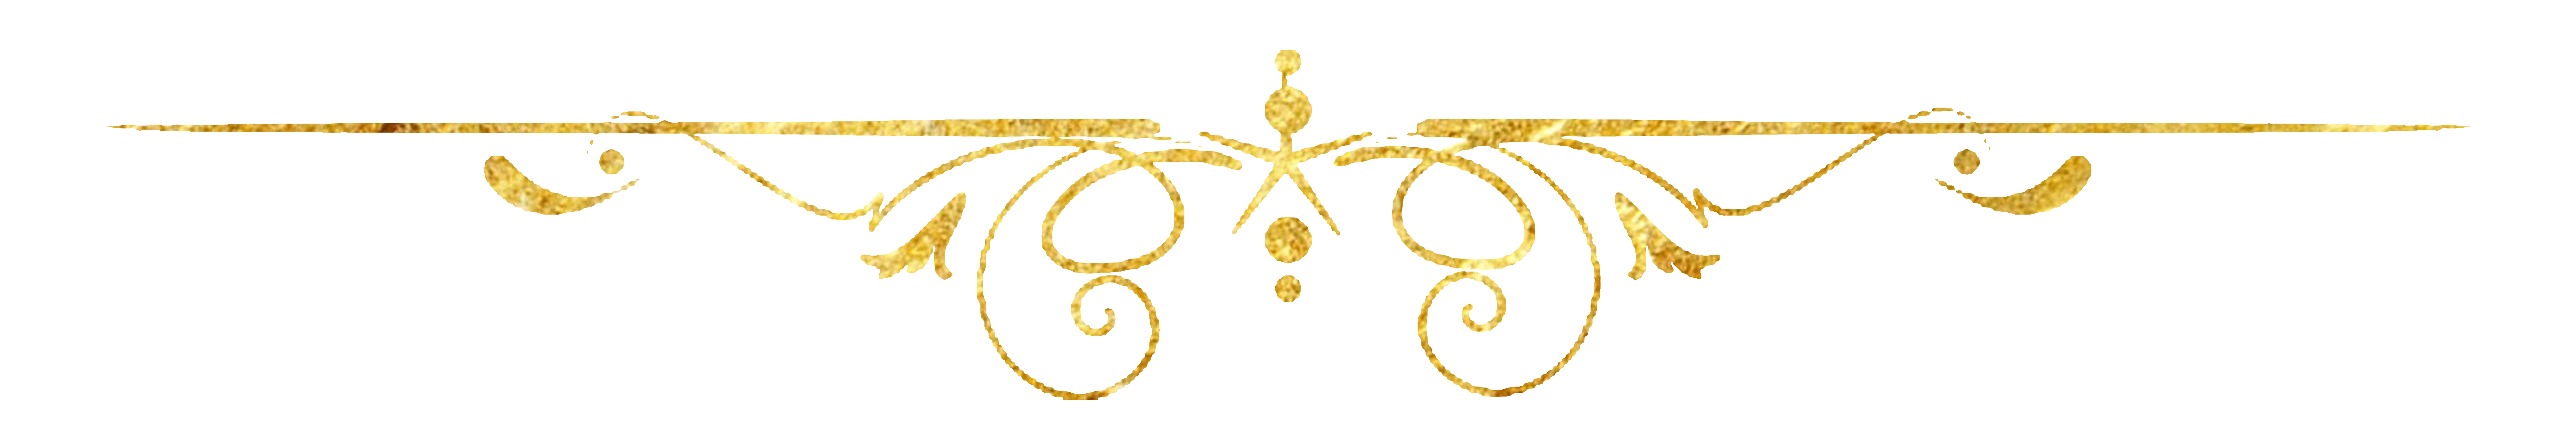 Png Gold Divider Image In Collection